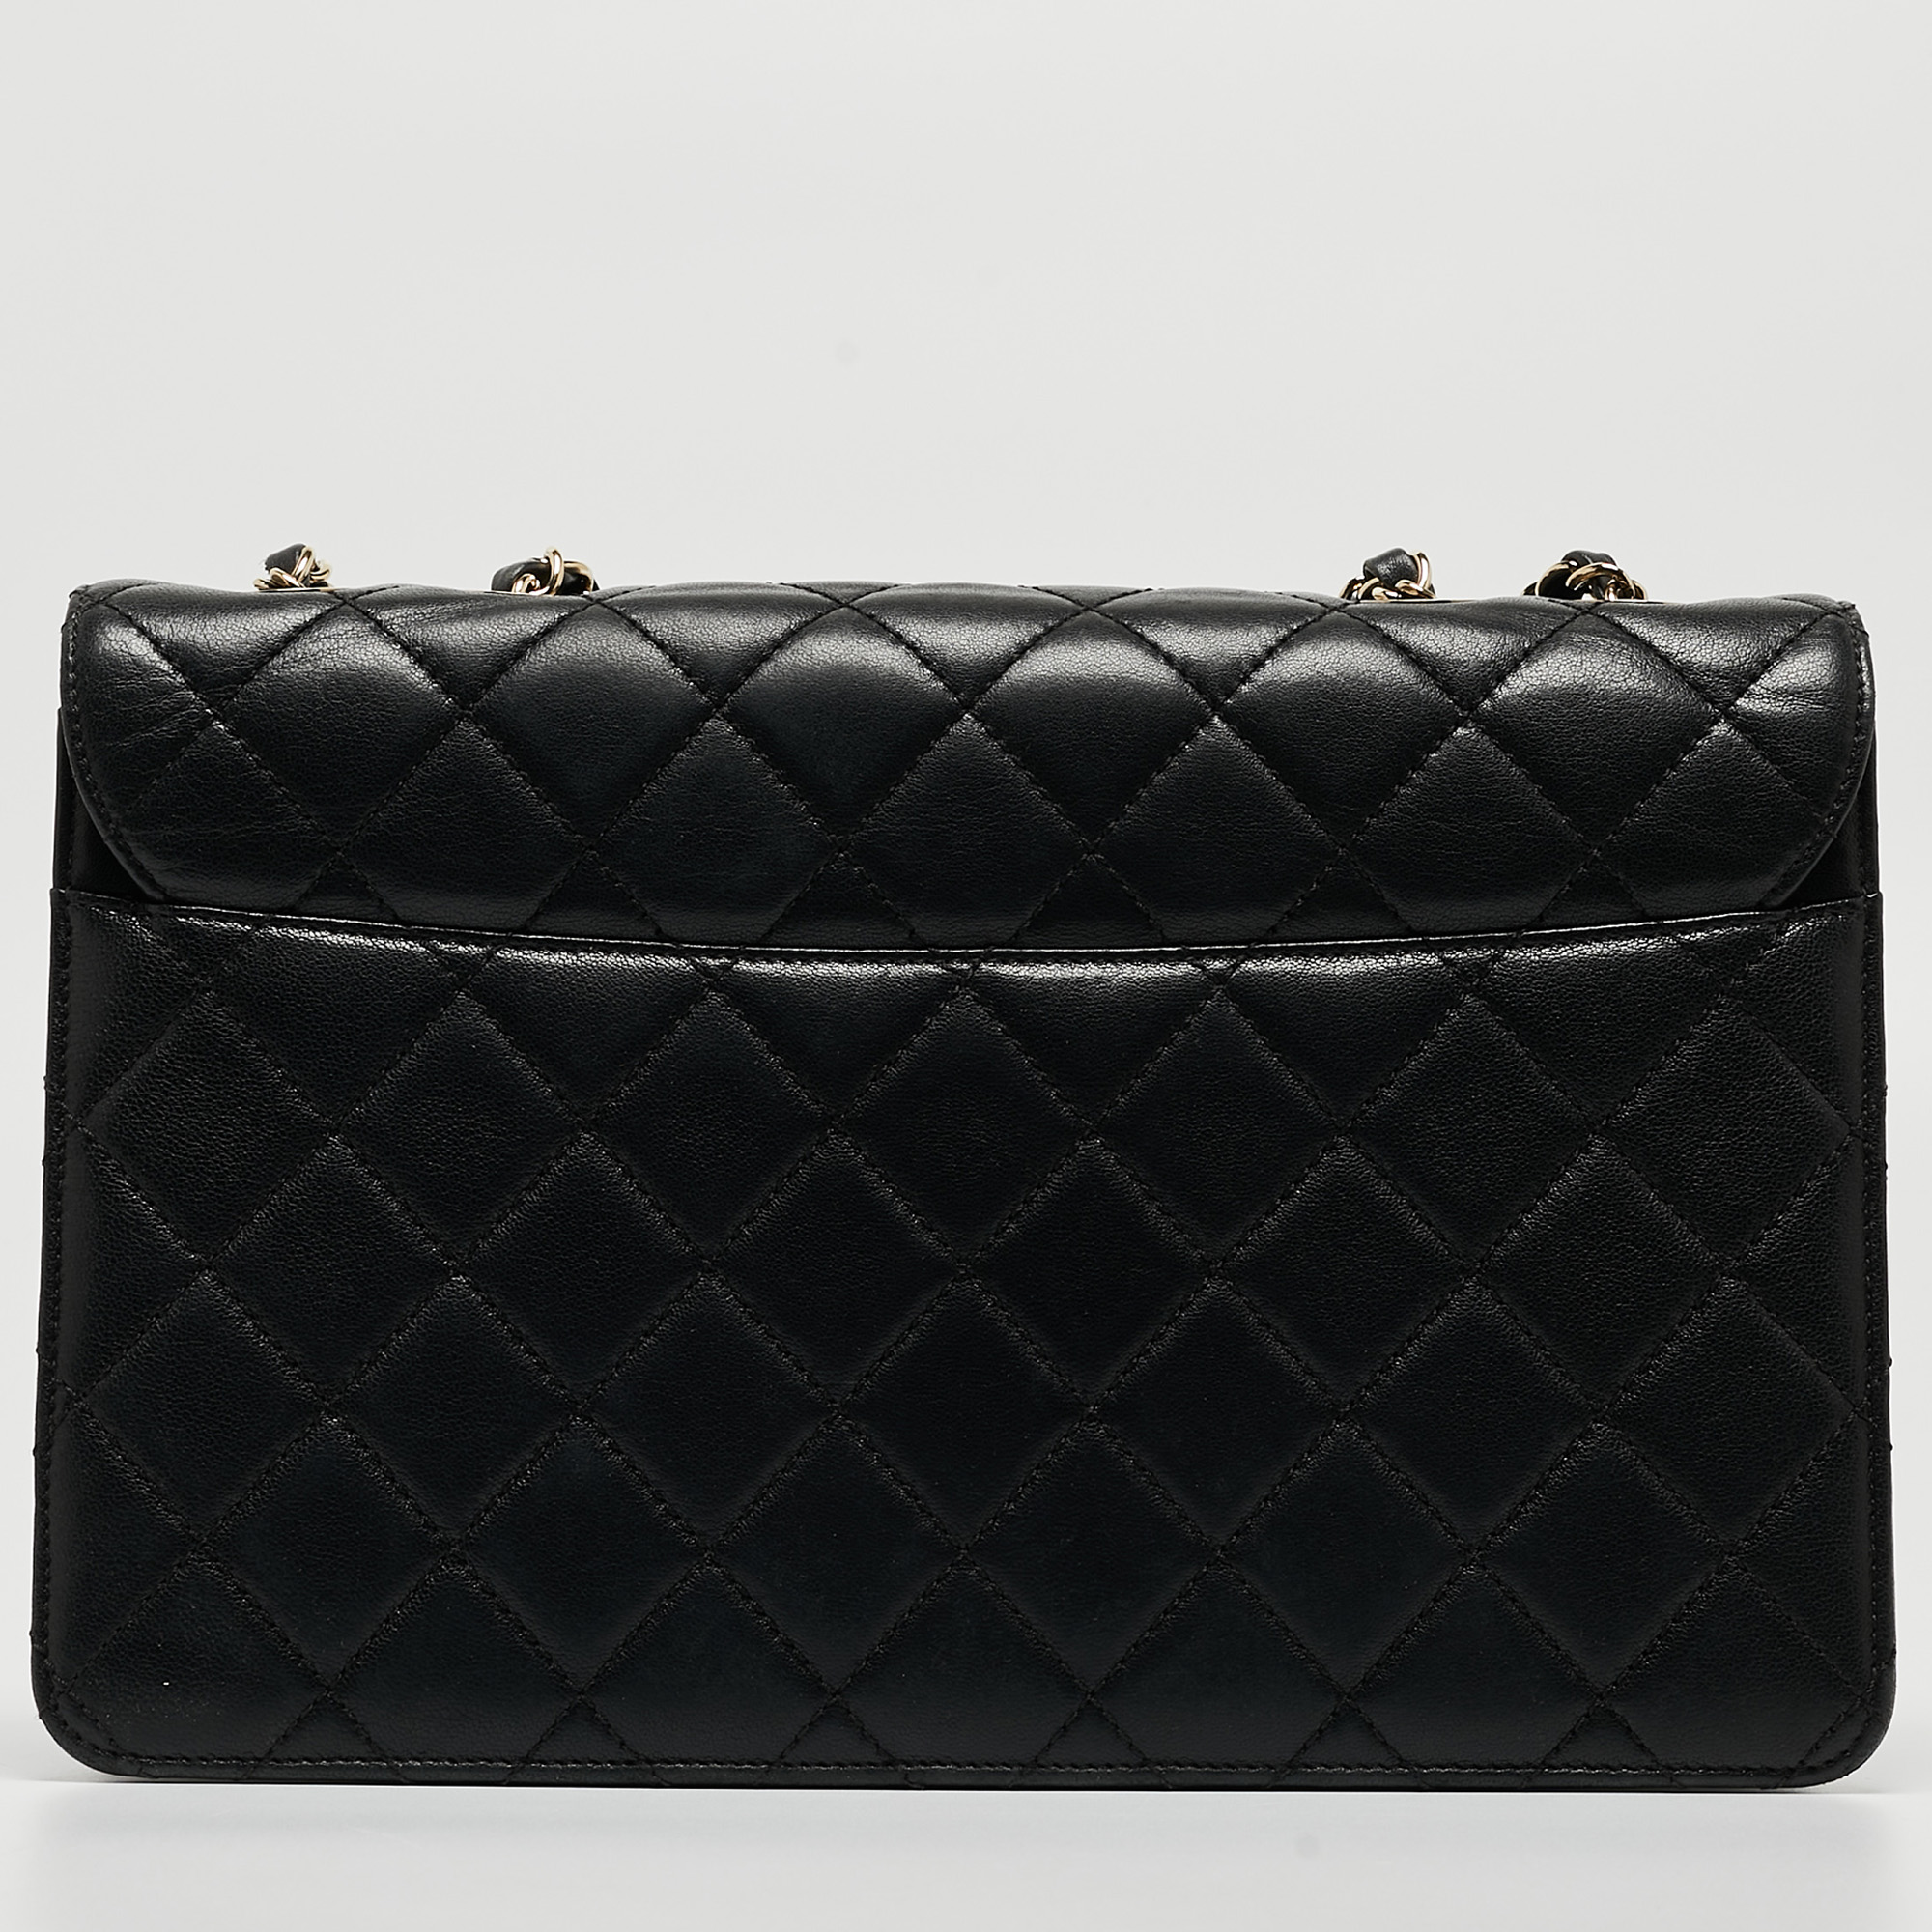 Chanel Black Quilted Leather Beauty Lock Flap Bag